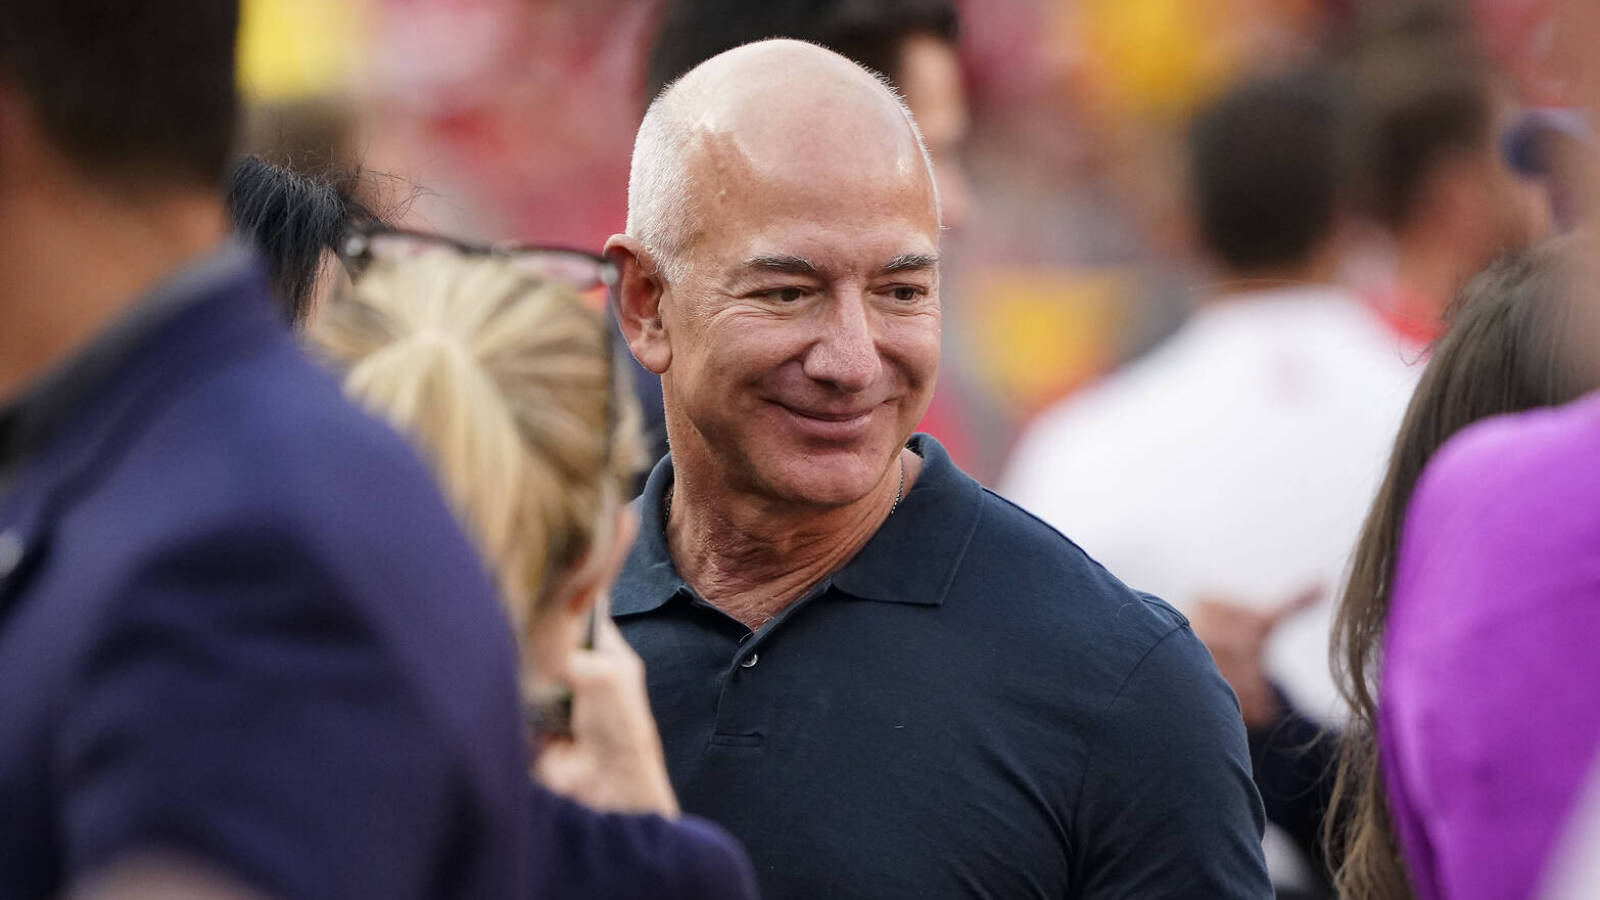 Jeff Bezos favorite to purchase Washington Commanders, reportedly could partner with Jay-Z